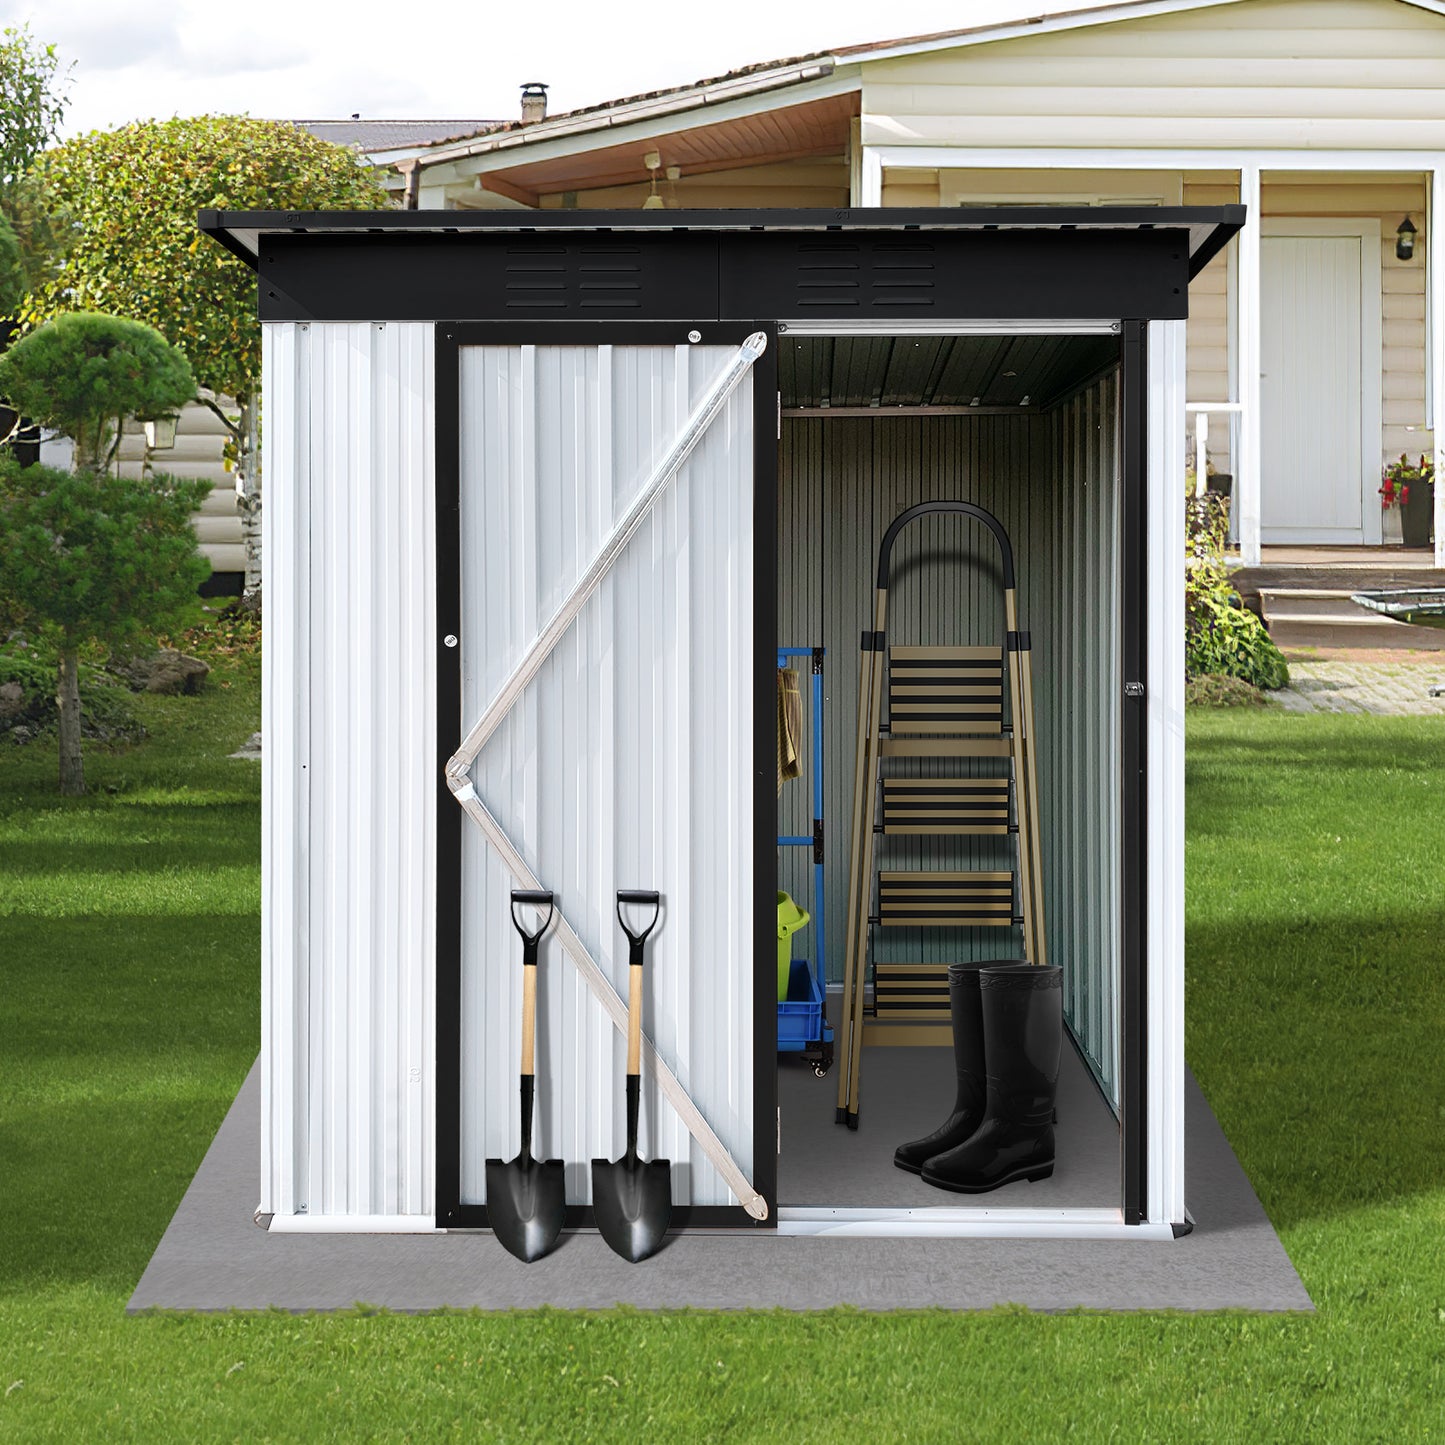 5' x 3' Outdoor Storage Shed, Metal Garden Shed with Single Lockable Door, Tools Storage Shed for Backyard, Patio, Lawn, Y011